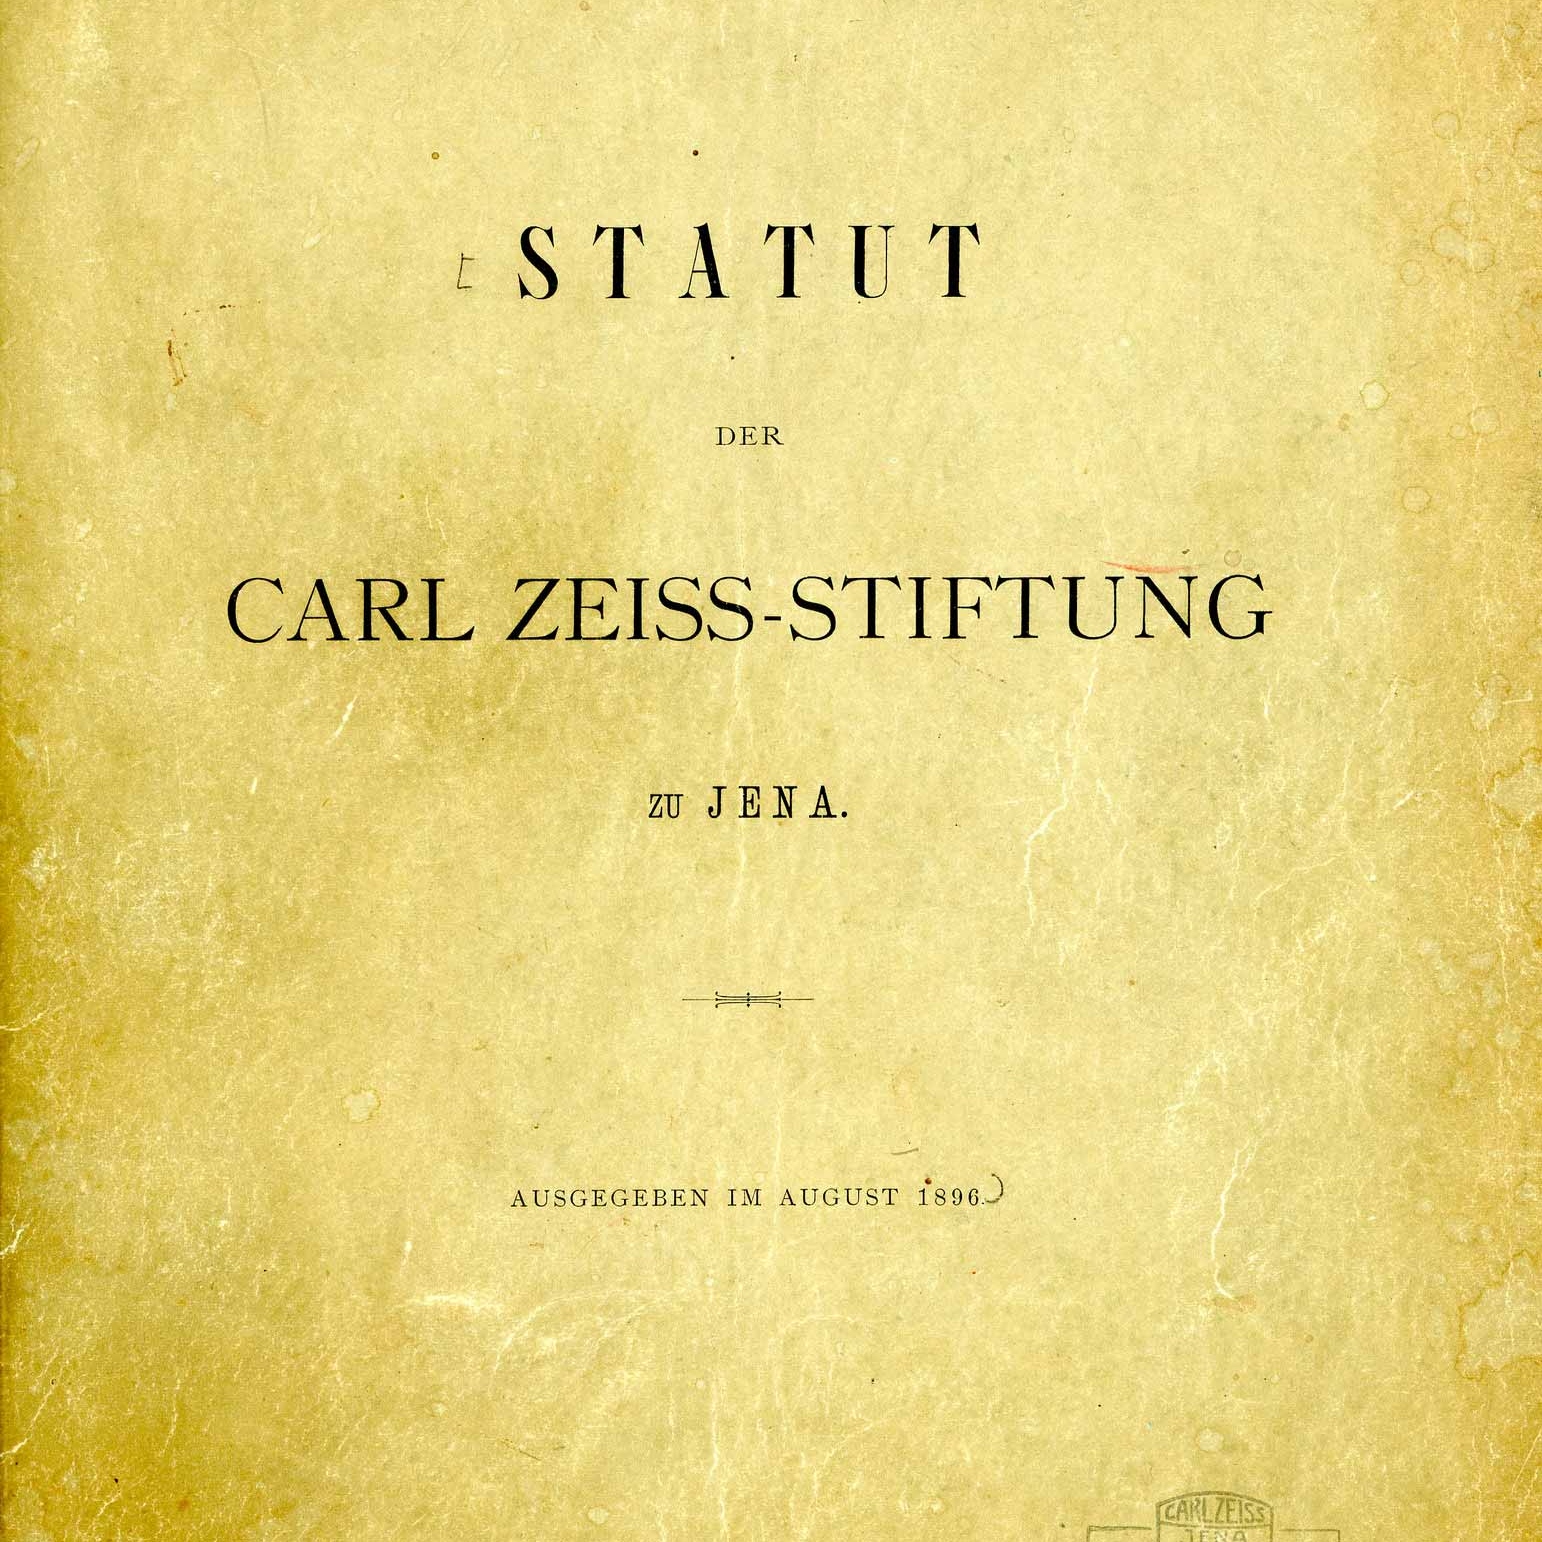 Statute of the Carl Zeiss Foundation 